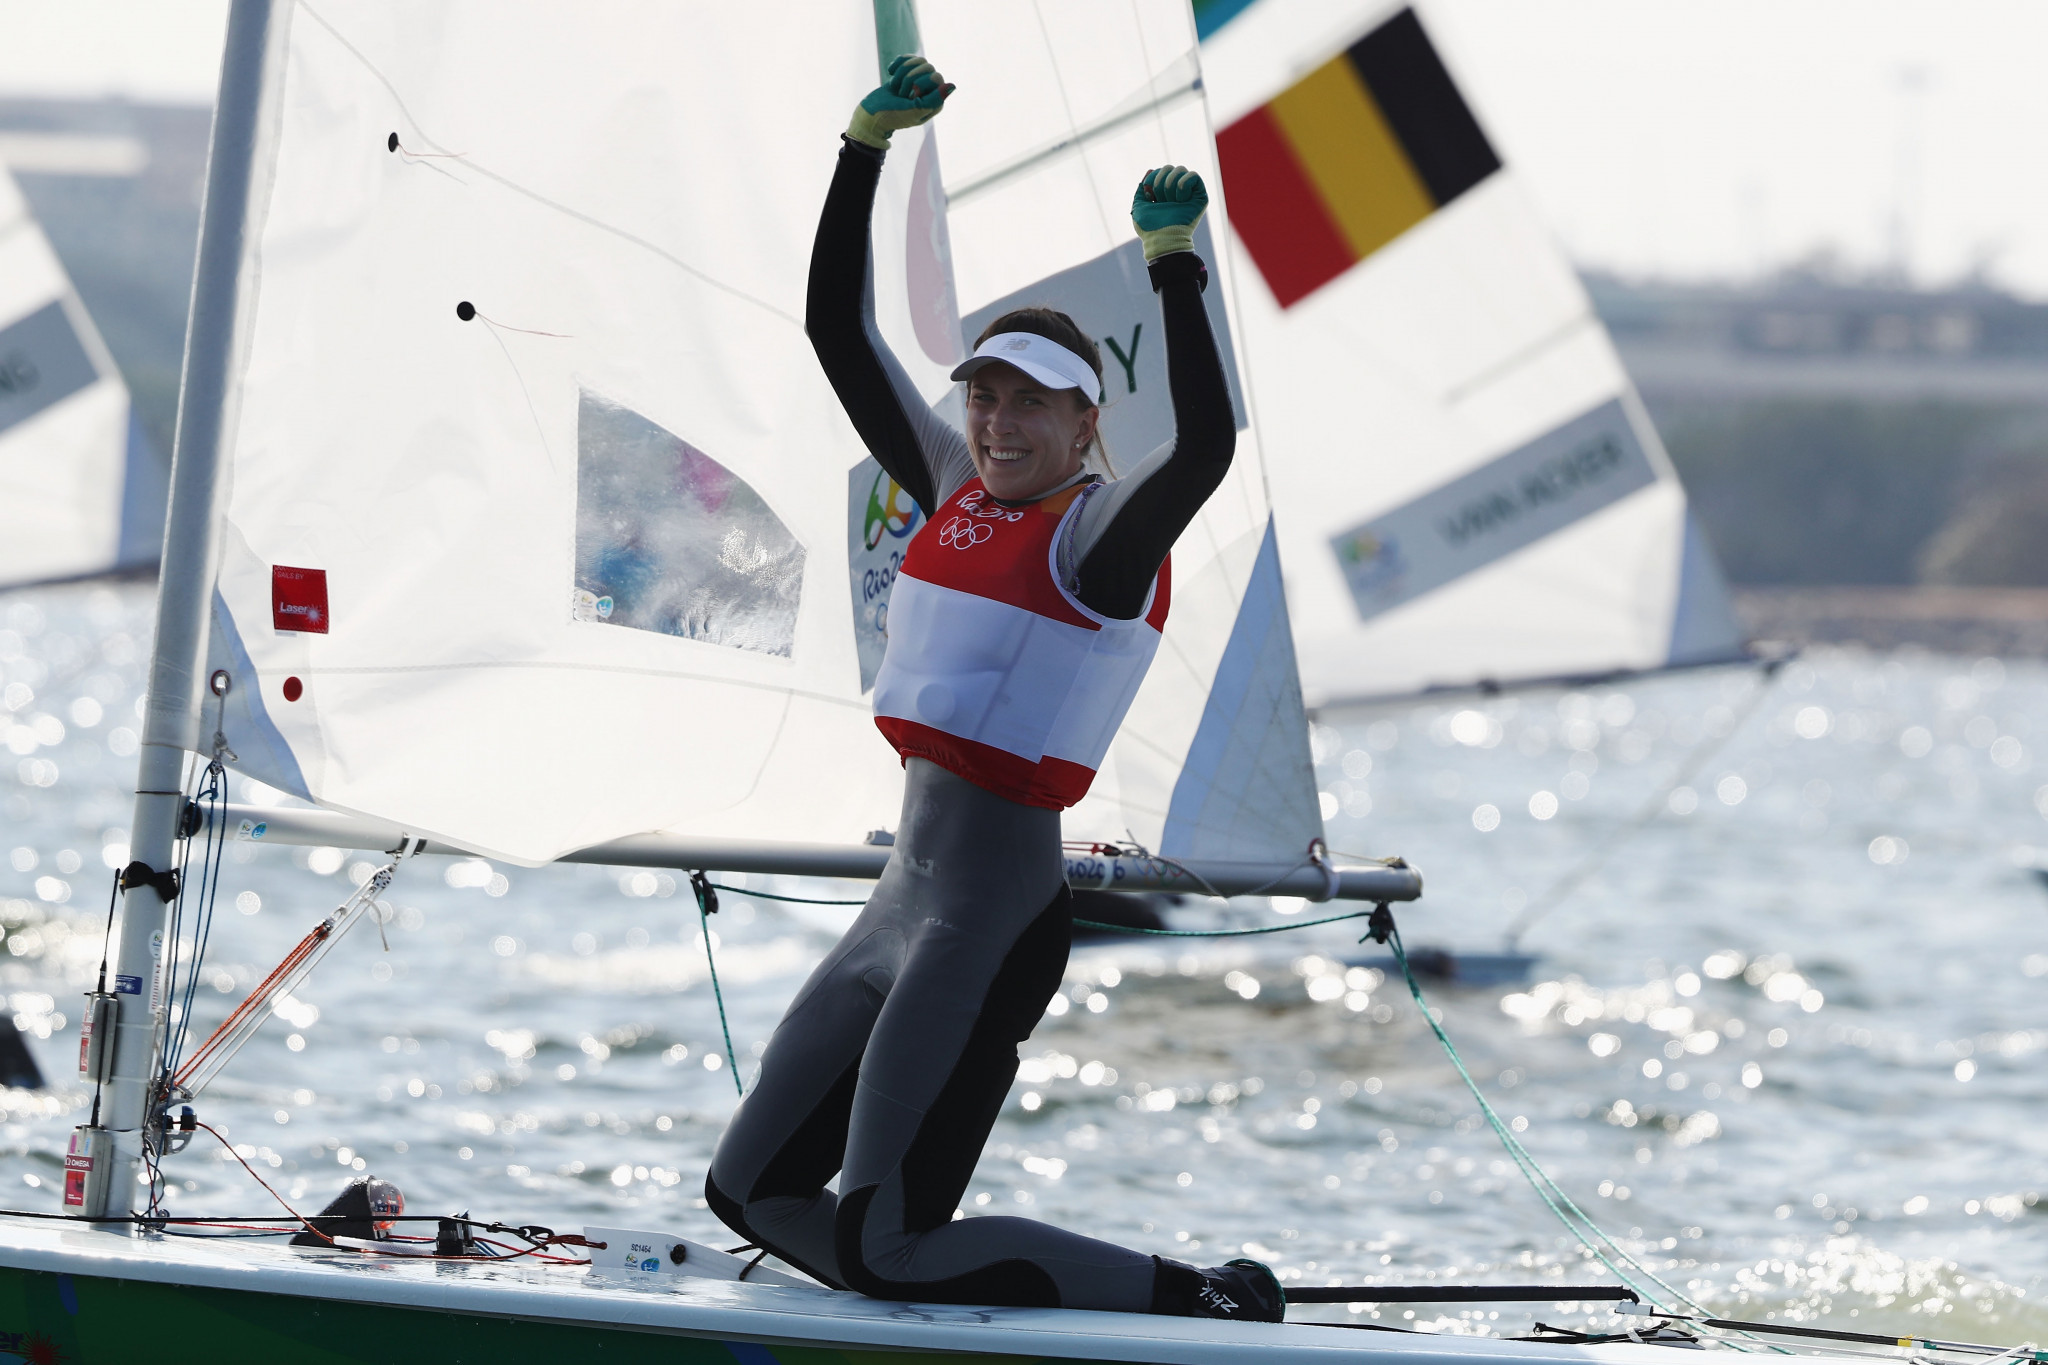 Rio 2016 silver medallist Annalise Murphy is among those to sit on the OFI's gender-balanced Athletes' Commission ©Getty Images